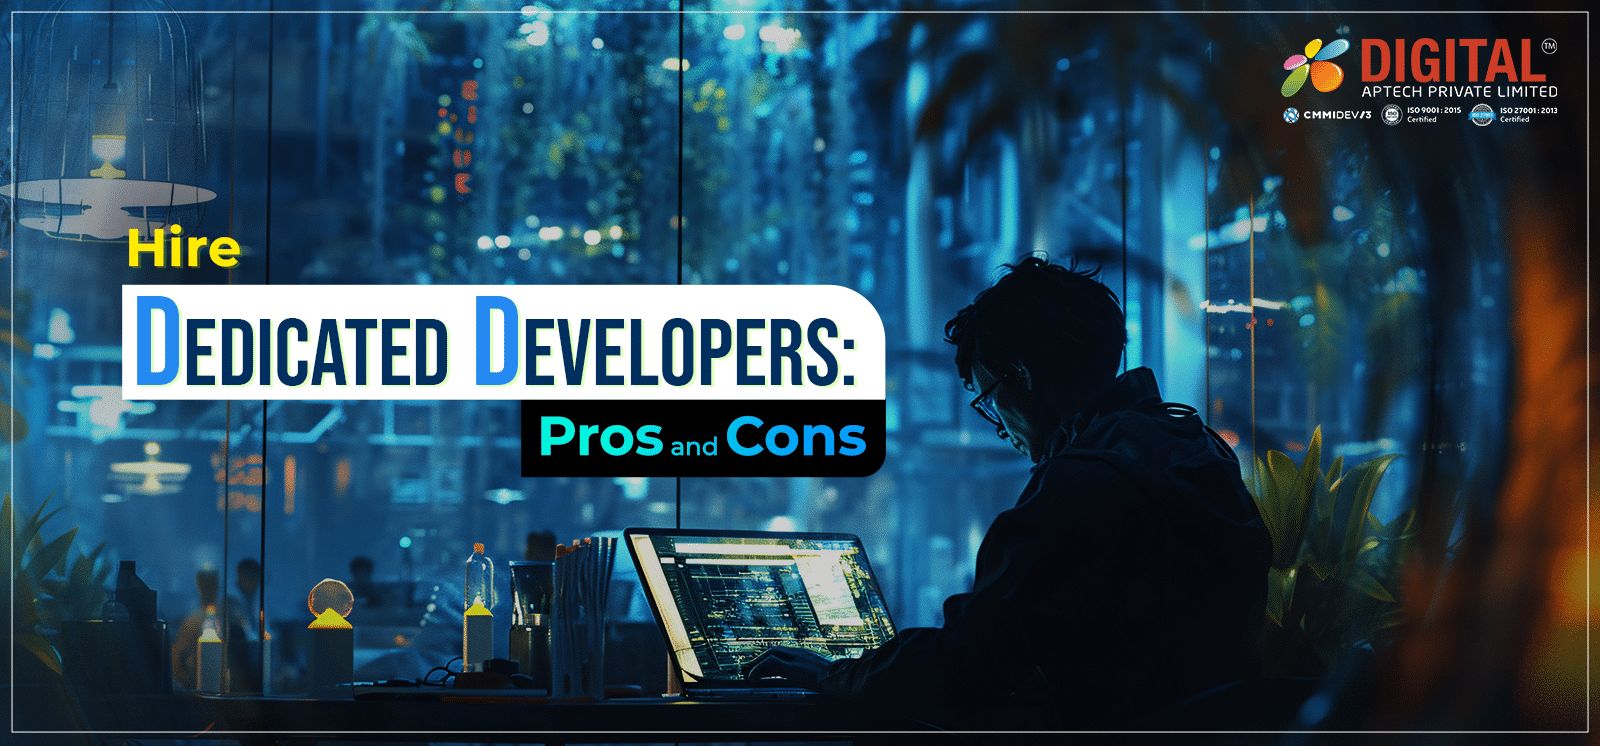 Hire Dedicated Developers: Pros and Cons